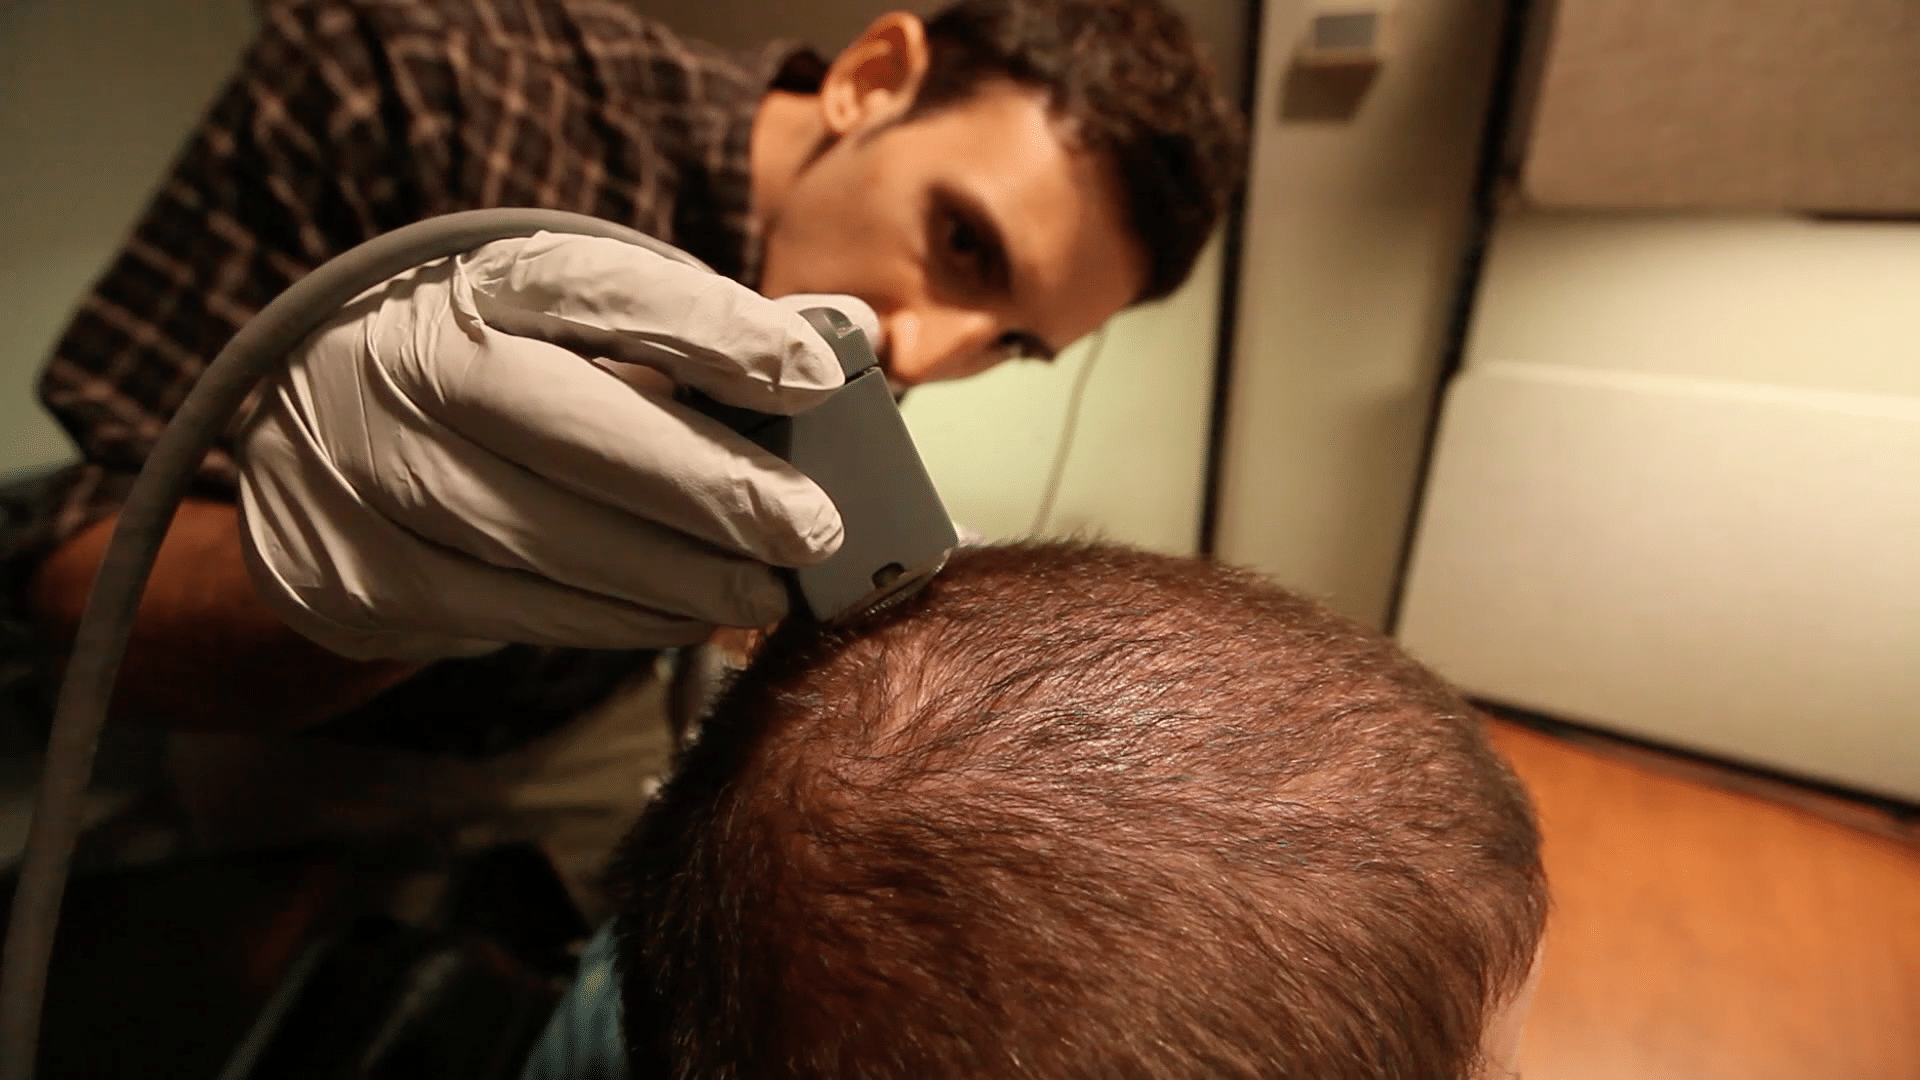 Battelle engineer Nicholas Annetta adjusts a cable attached to the Utah microelectrode array inserted in Ian Burkhart's brain. (<a href="http://osuwmc.multimedia-newsroom.com/index.php/2016/04/13/man-uses-his-own-brainwaves-to-retrain-his-paralyzed-hand/">The Ohio State University Wexner Medical Center</a>)